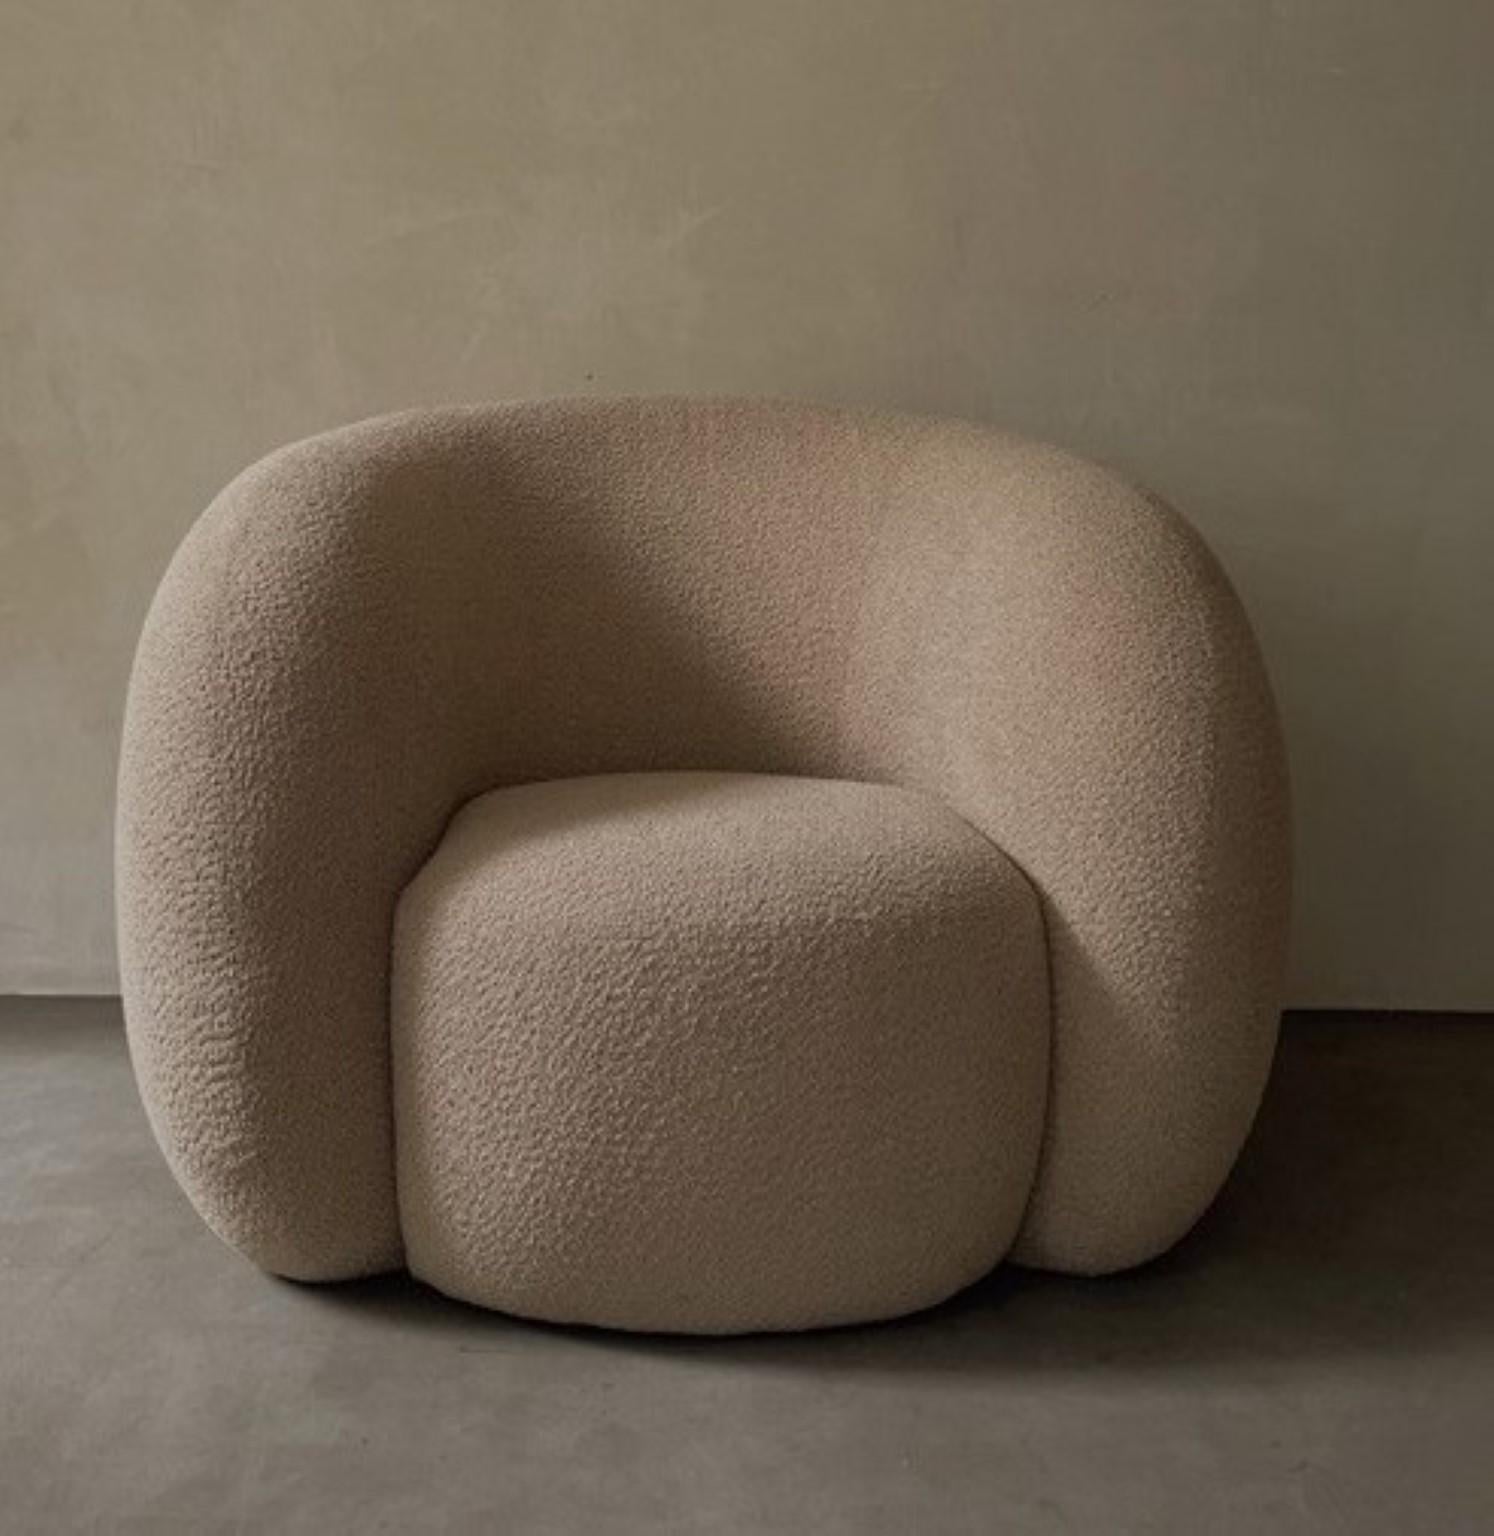 Circular lounge chair by kar
Dimensions: W 105 x D 93 x H 80 cm
Materials: Fabric, MDF frame


Kar, is the root of Sanskrit Karma, meaning karmic repetition. We seek the cause and effect in aesthetics, inspired from the past, the present, and the